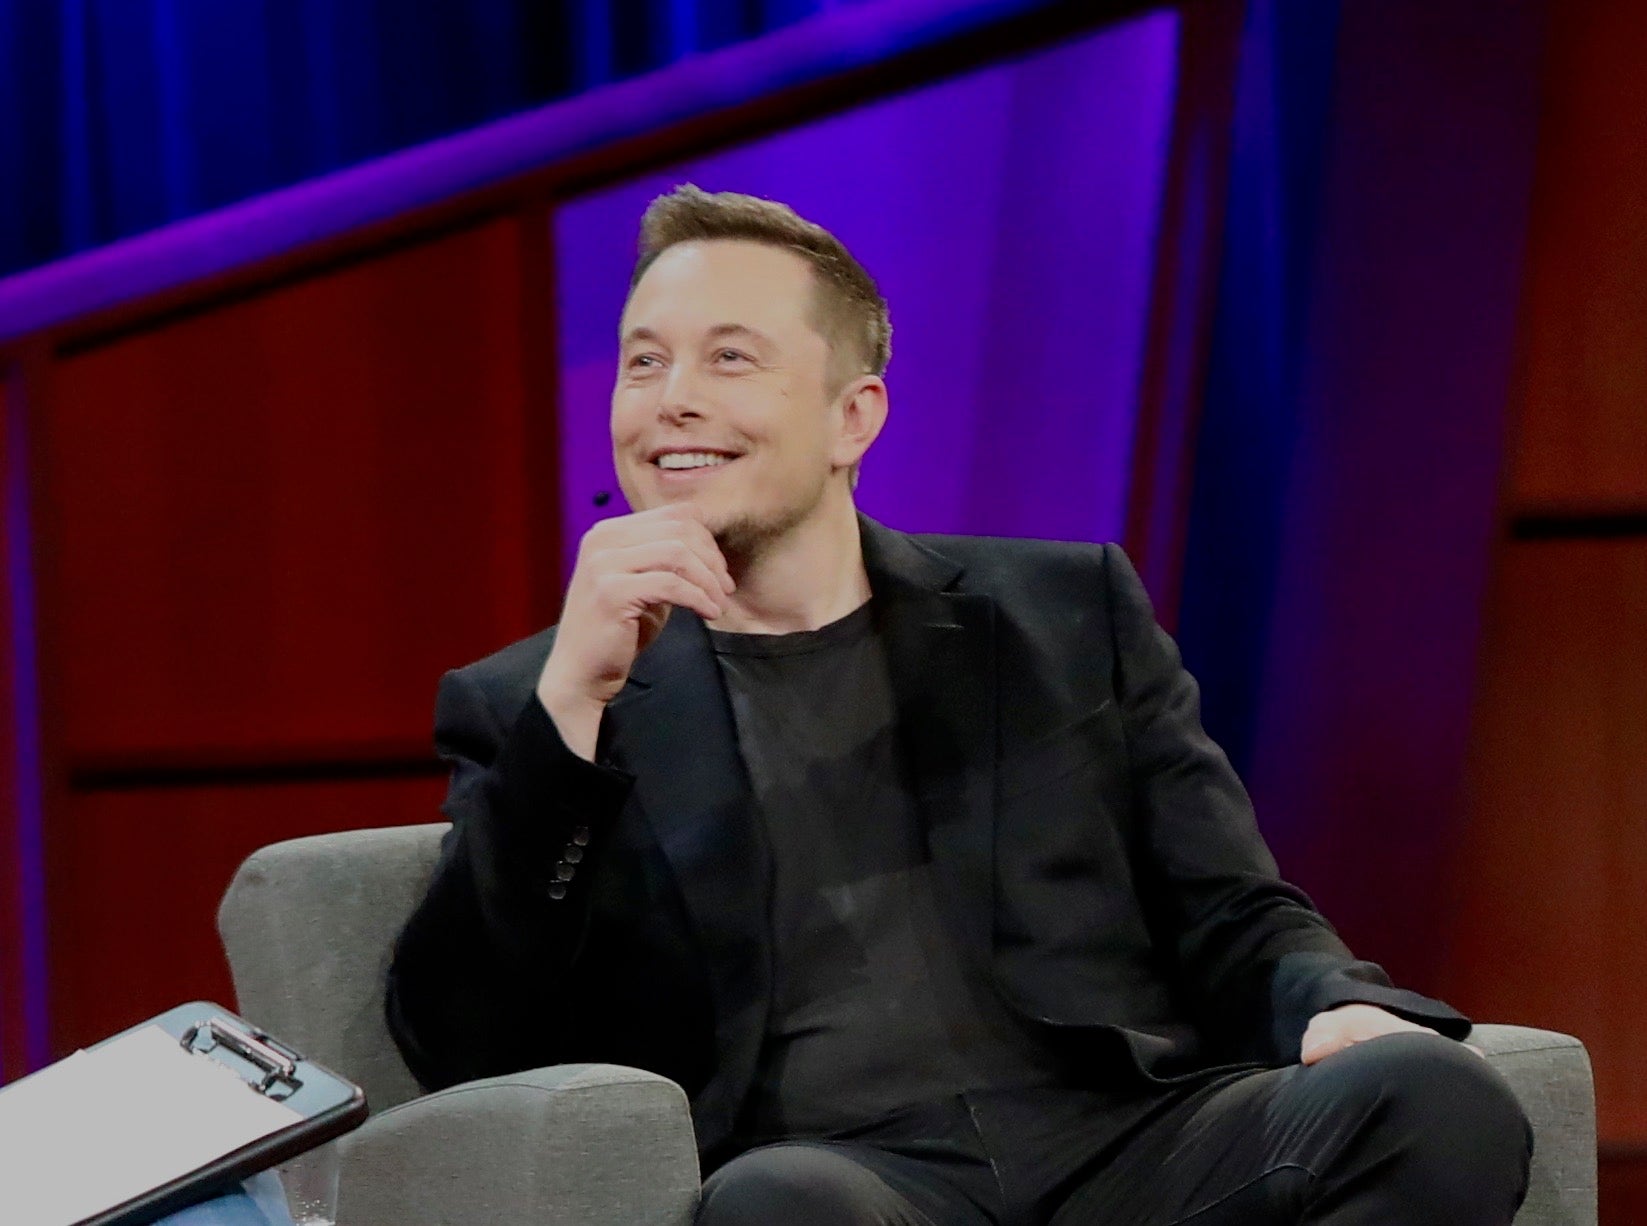 Elon Musk Scoffs At 'Conventional CEOs:' They Seem Like Android or Drone